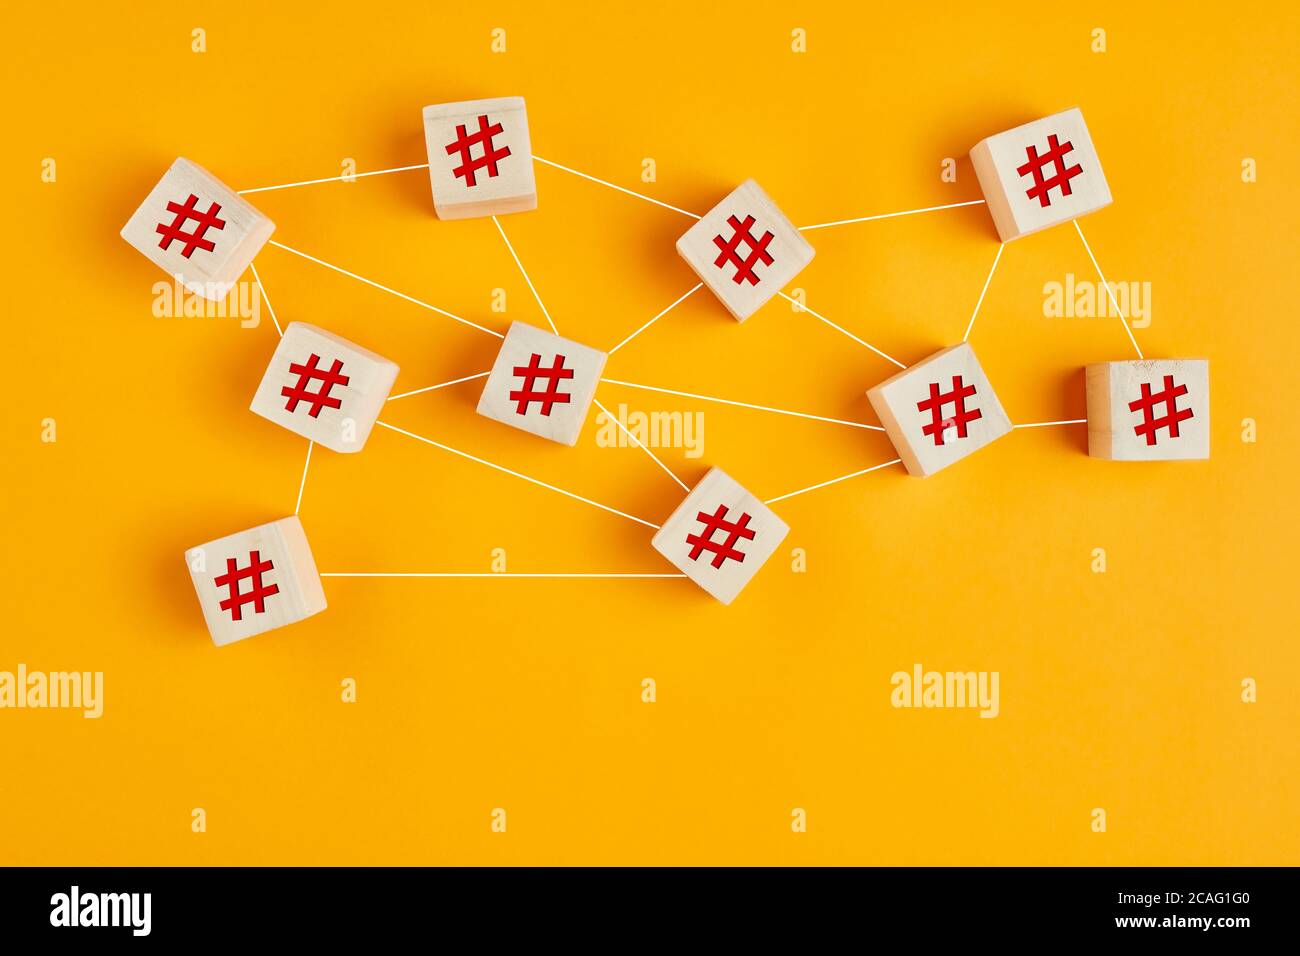 Hashtag symbols on wooden cubes connected to each other with lines on yellow background. Hashtag connection, search or trending topic in social media Stock Photo